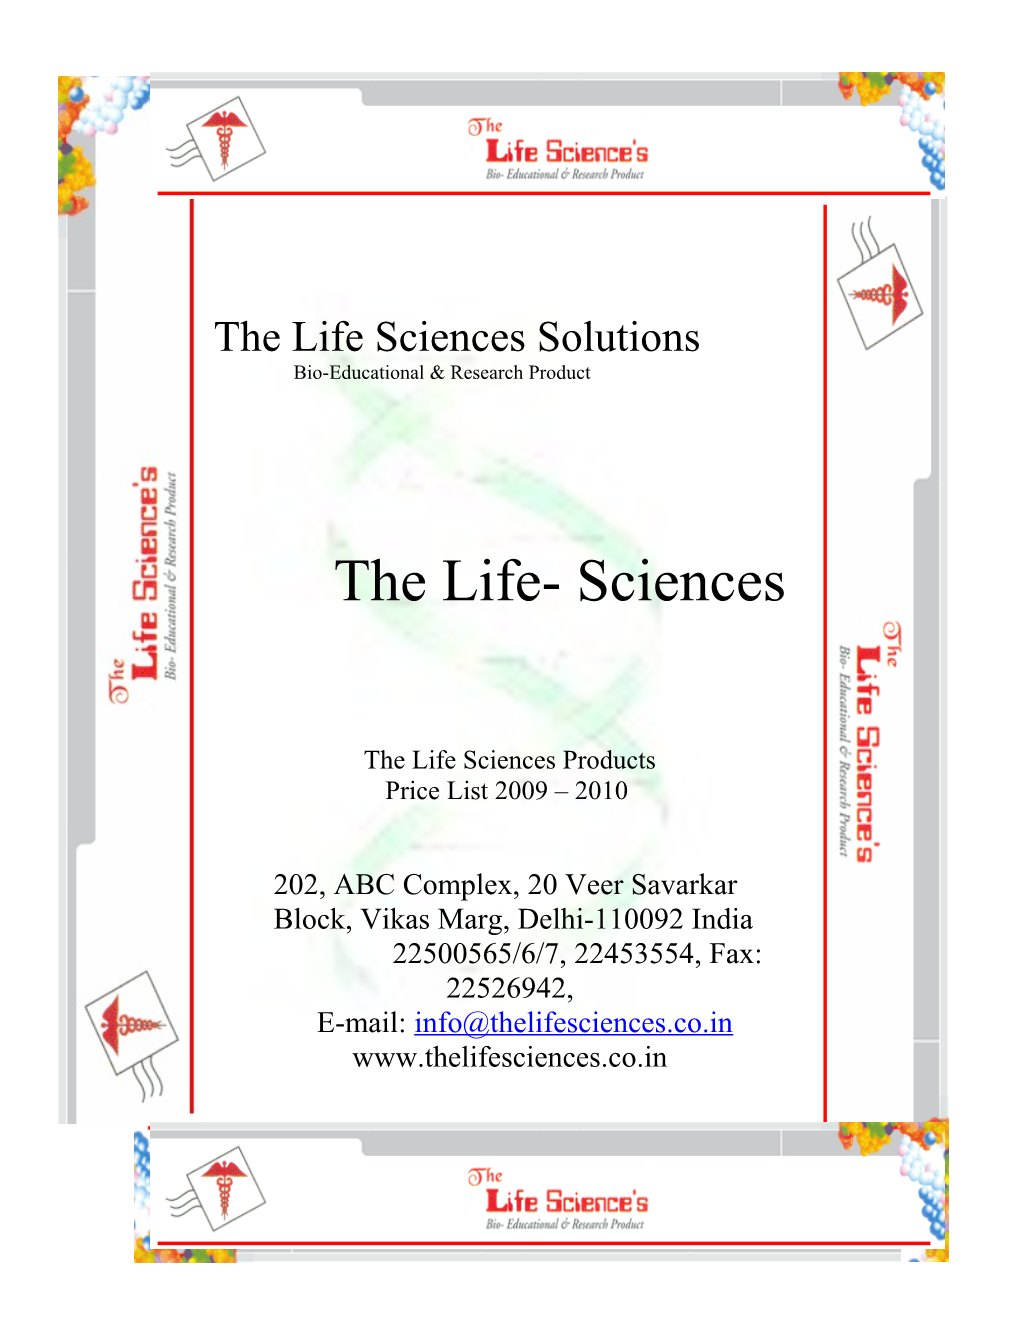 The Life Sciences Solutions